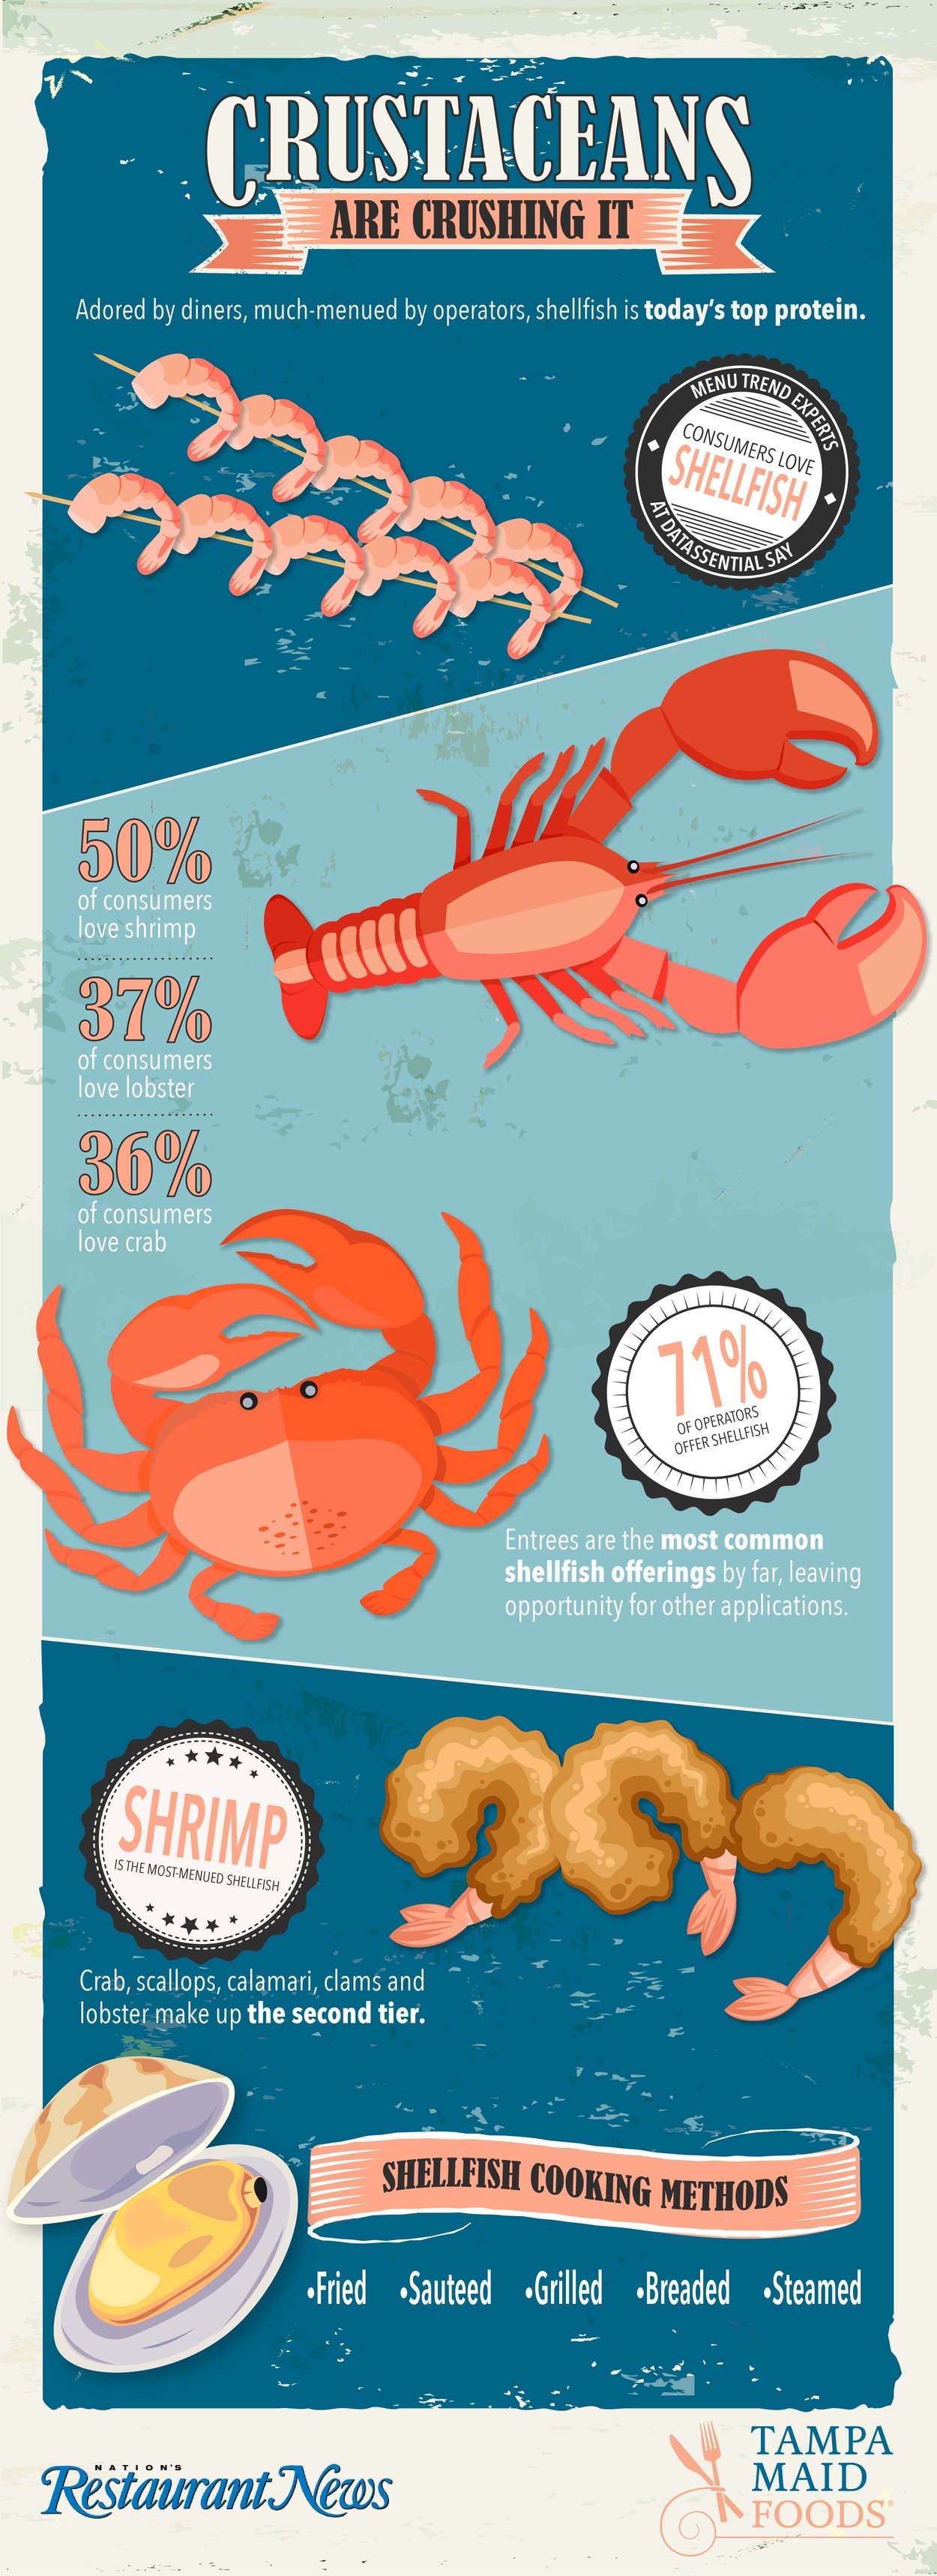 Crustaceans are crushing it [INFOGRAPHIC]